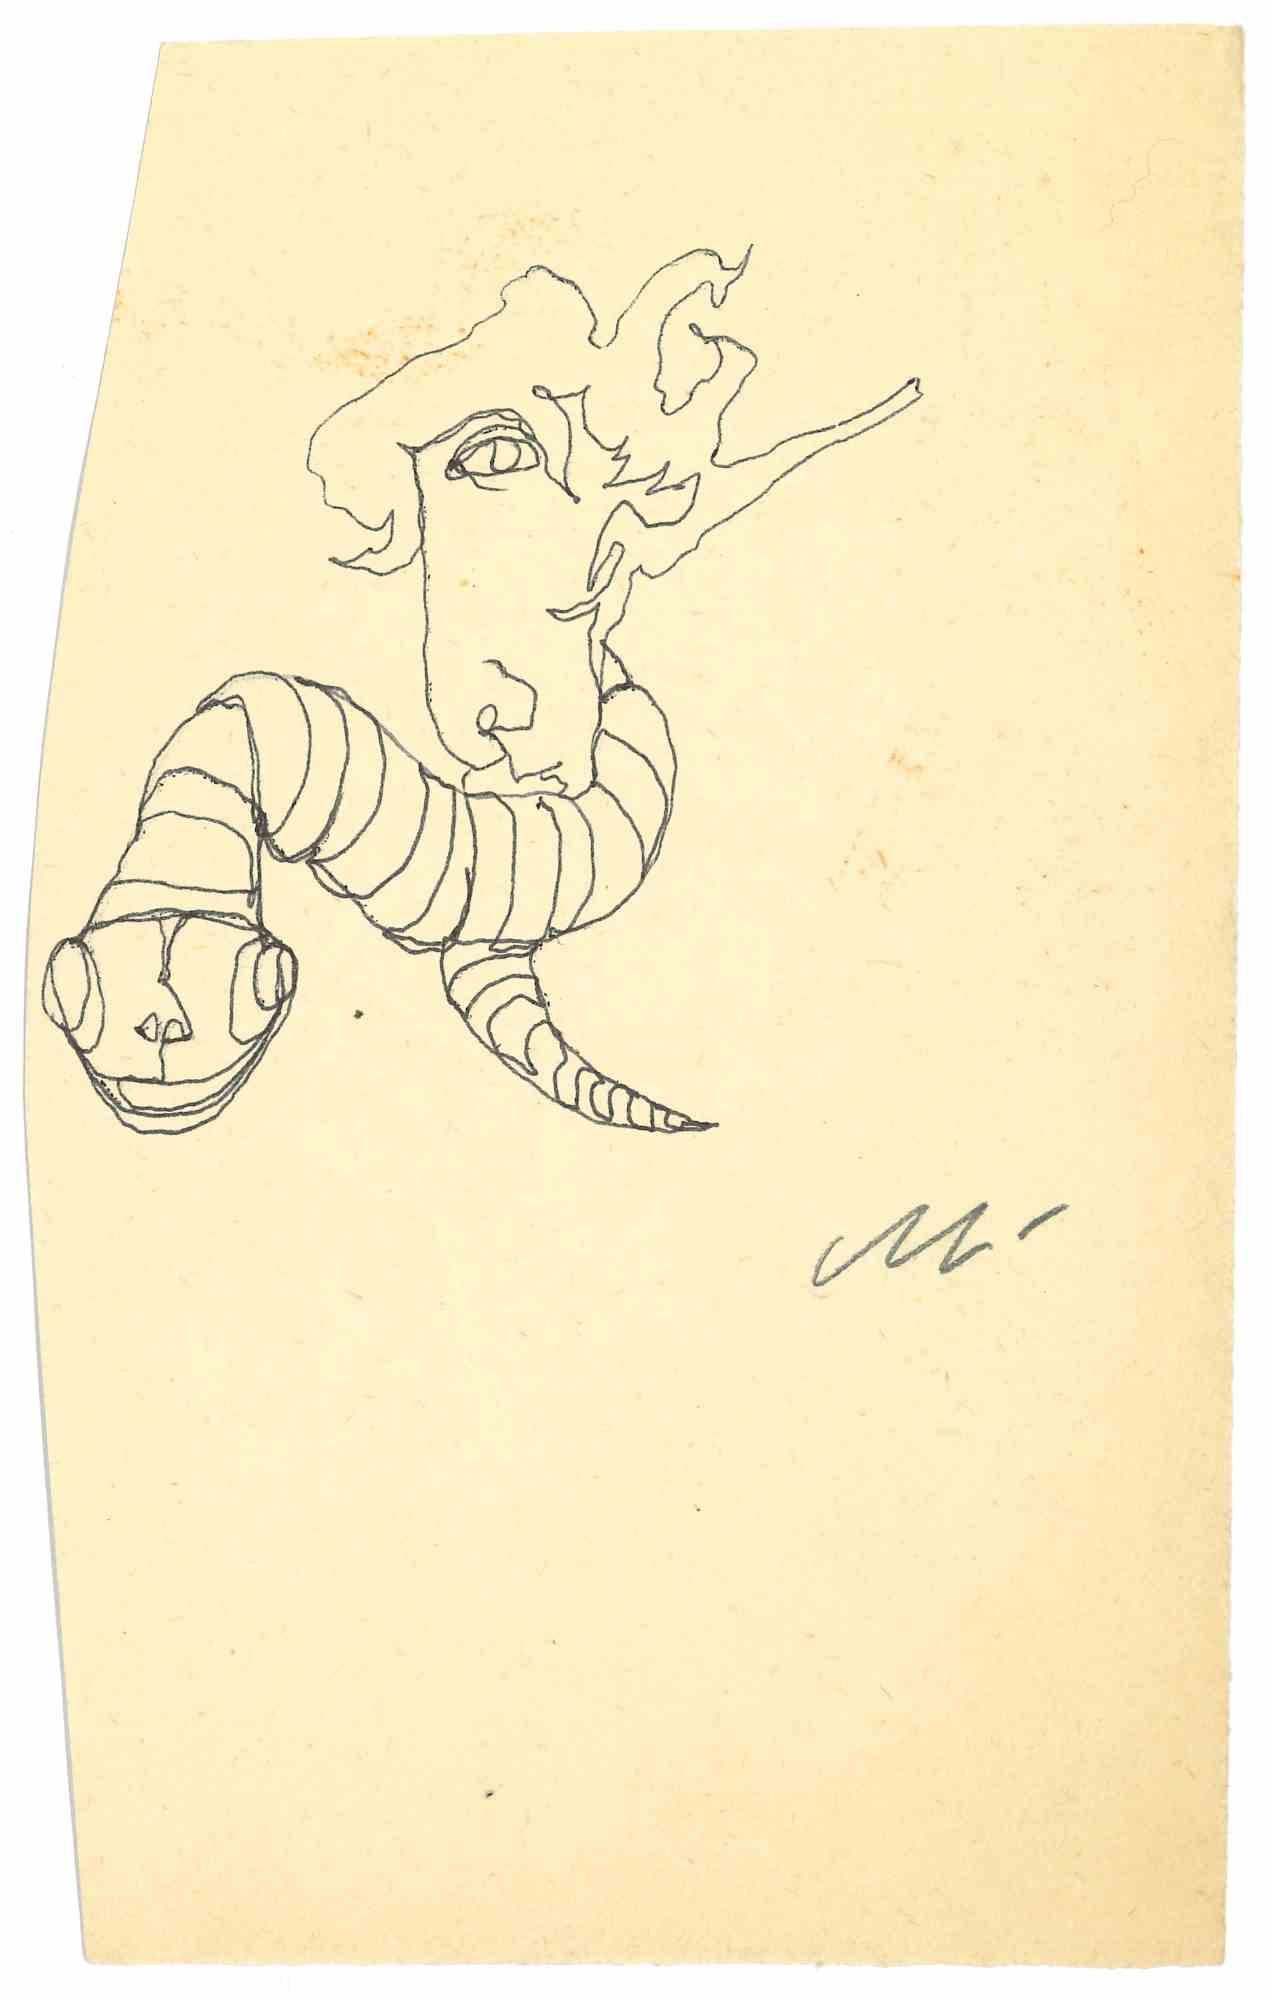 Creature is an ink drawing realized by Mino Maccari  (1924-1989) in the Mid-20th Century.

Hand-signed.

Good conditions with slight foxing.

Mino Maccari (Siena, 1924-Rome, June 16, 1989) was an Italian writer, painter, engraver and journalist,